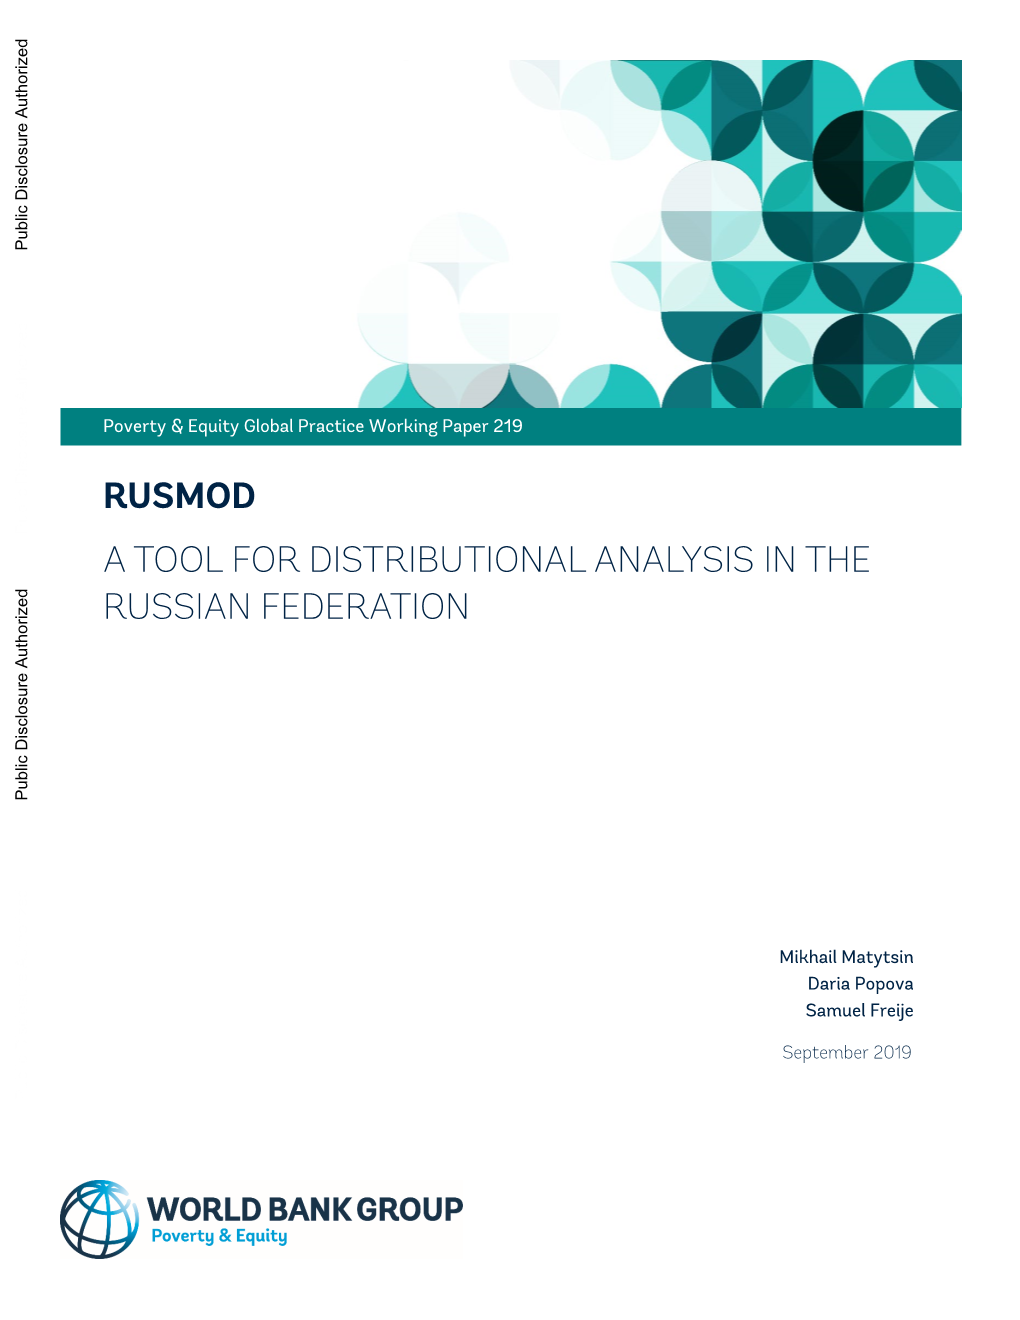 Rusmod a Tool for Distributional Analysis in the Russian Federation